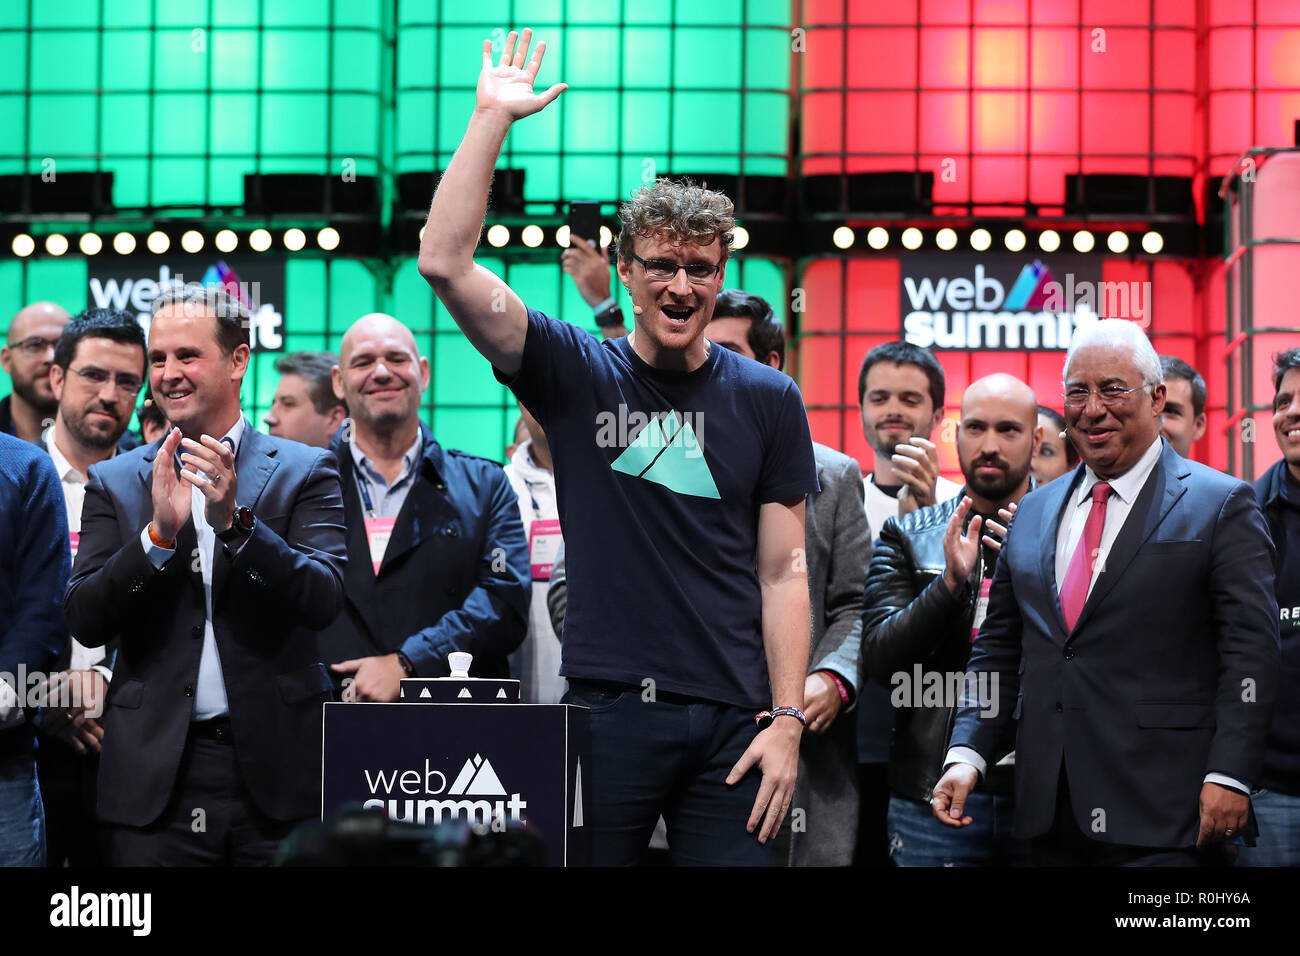 Lisbon, Portugal. 5th Nov, 2018. Mayor of Lisbon Fernando Medina (L), Portugal's Prime Minister Antonio Costa (R ) and Web Summit's Irish chief executive officer Paddy Cosgrave (C ) during the Web Summit 2018 opening ceremony in Lisbon, Portugal on November 5, 2018. Credit: Pedro Fiuza/ZUMA Wire/Alamy Live News Stock Photo